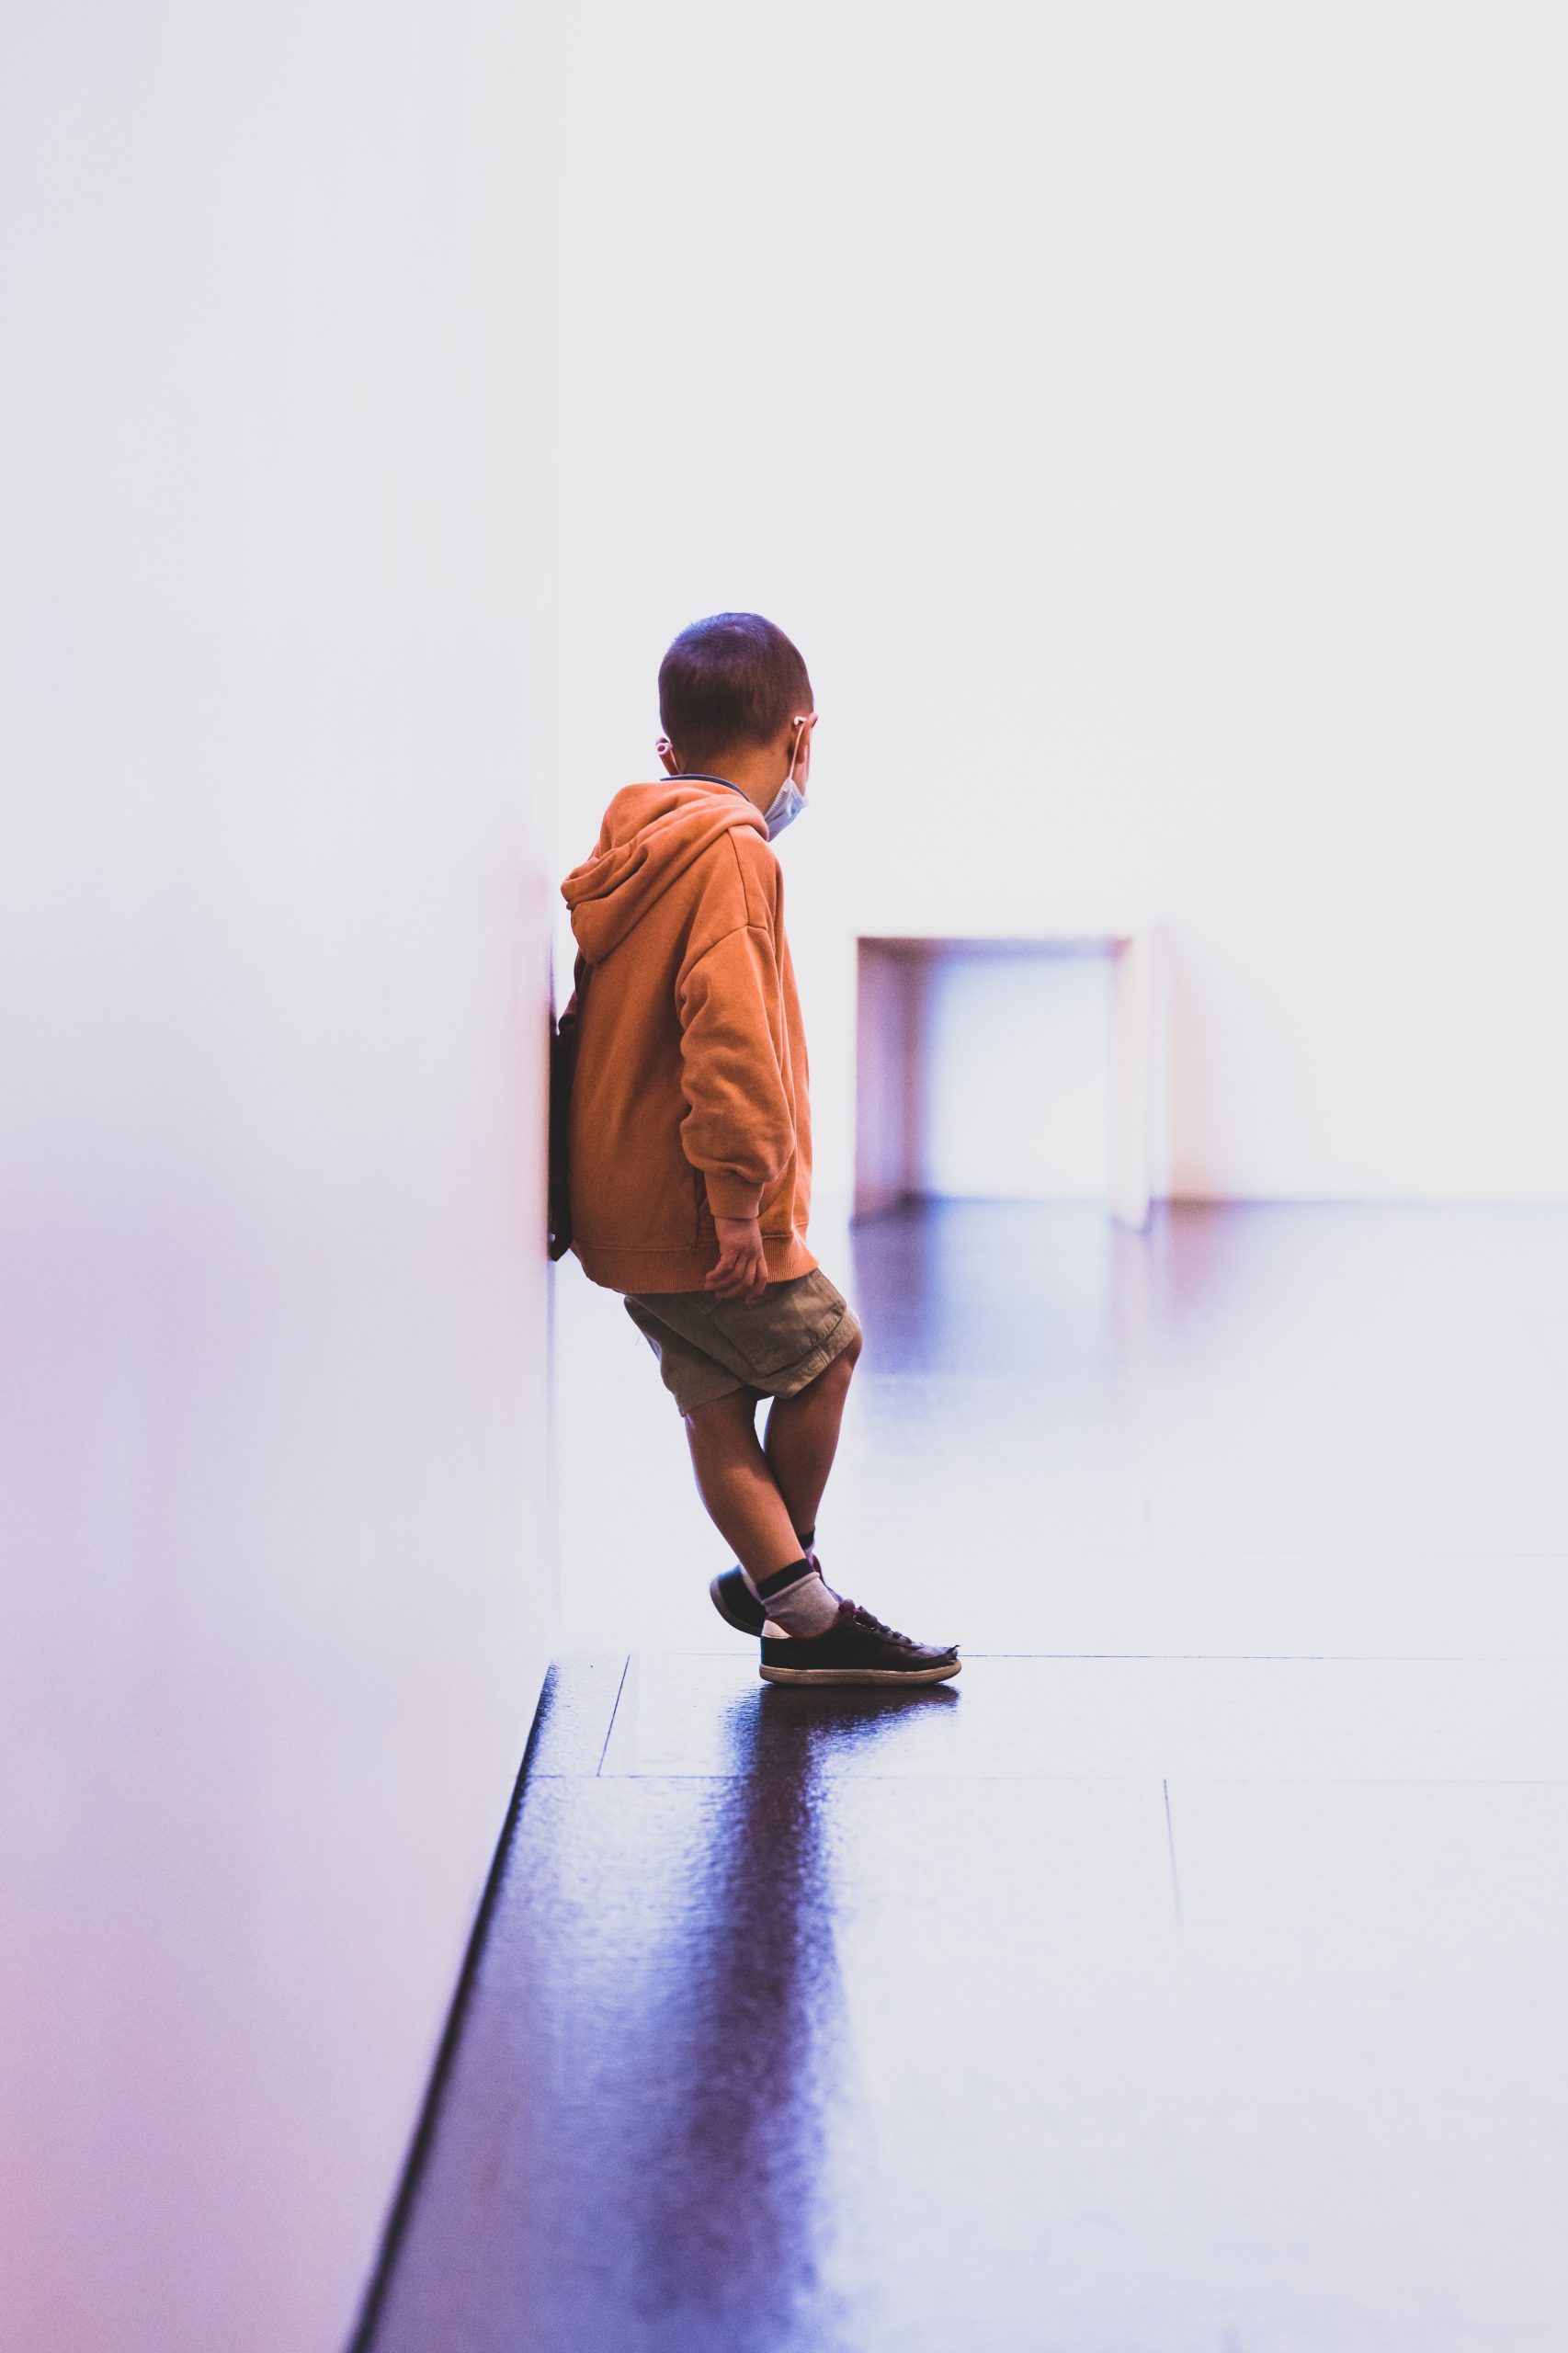 A young boy wearing an orange hoodie and khaki shorts leans agains a white wall and looks away from the camera